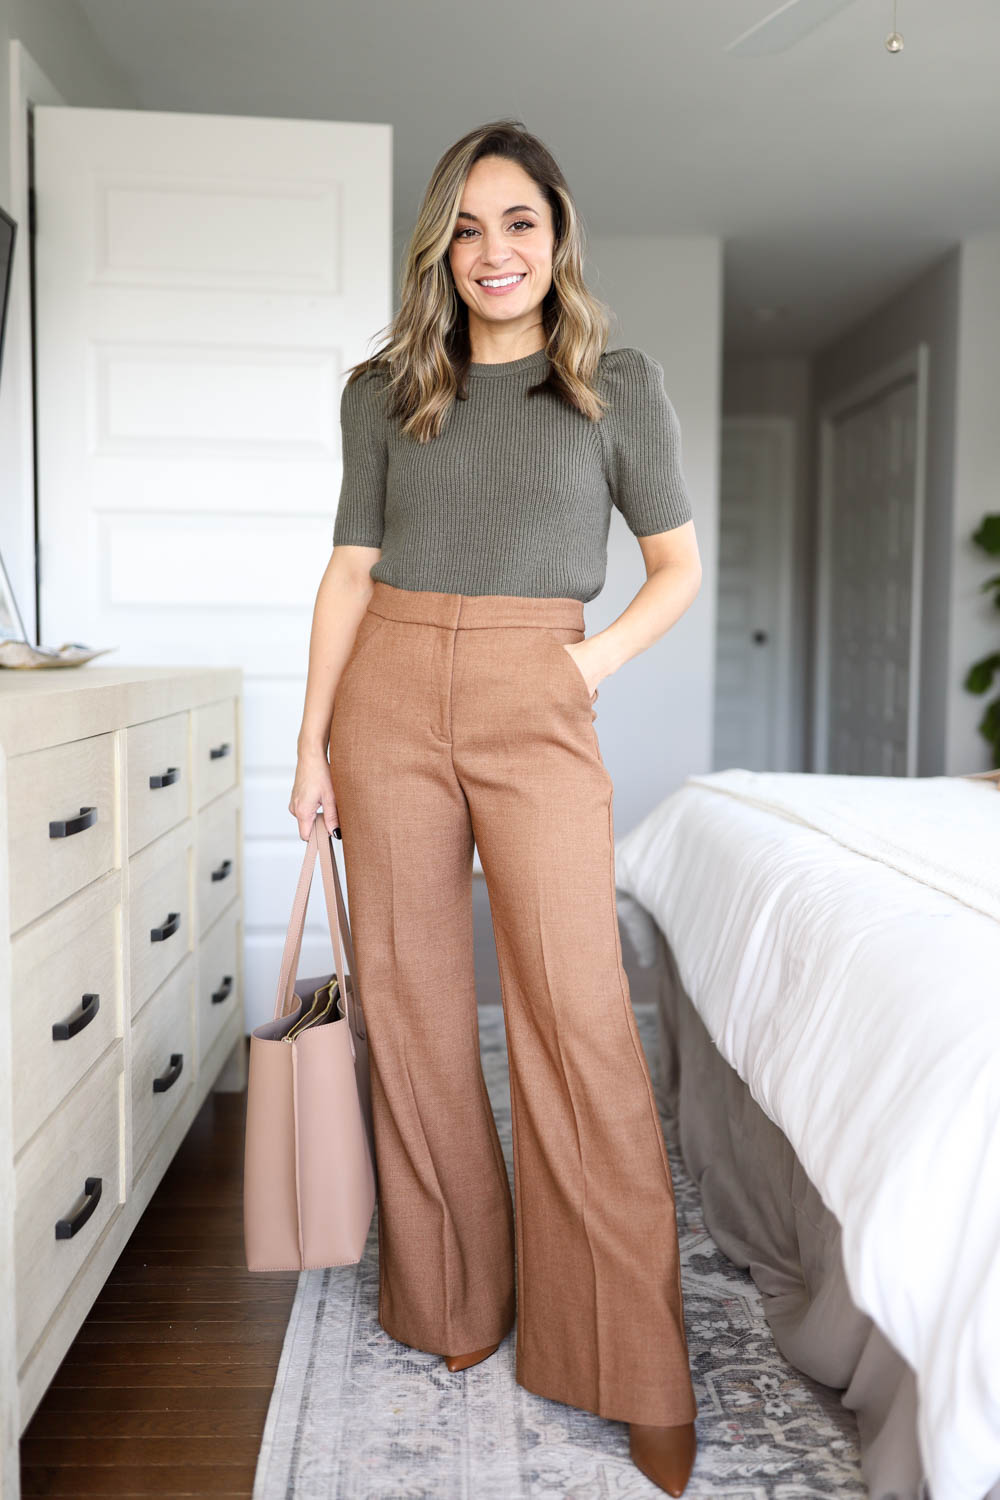 brown pumps outfit